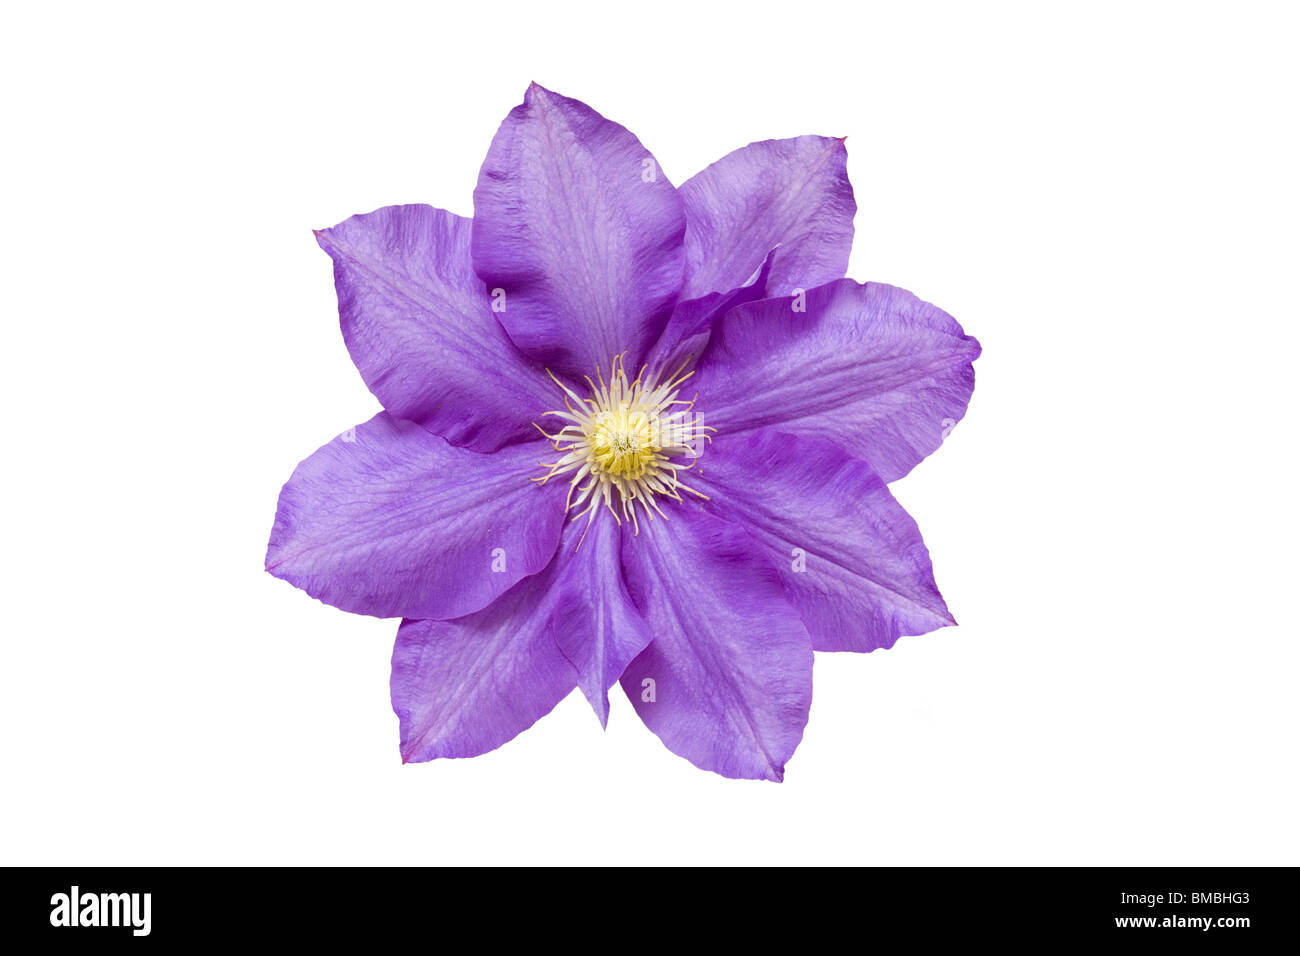 Flower of Clematis 'HF Young'. Stock Photo